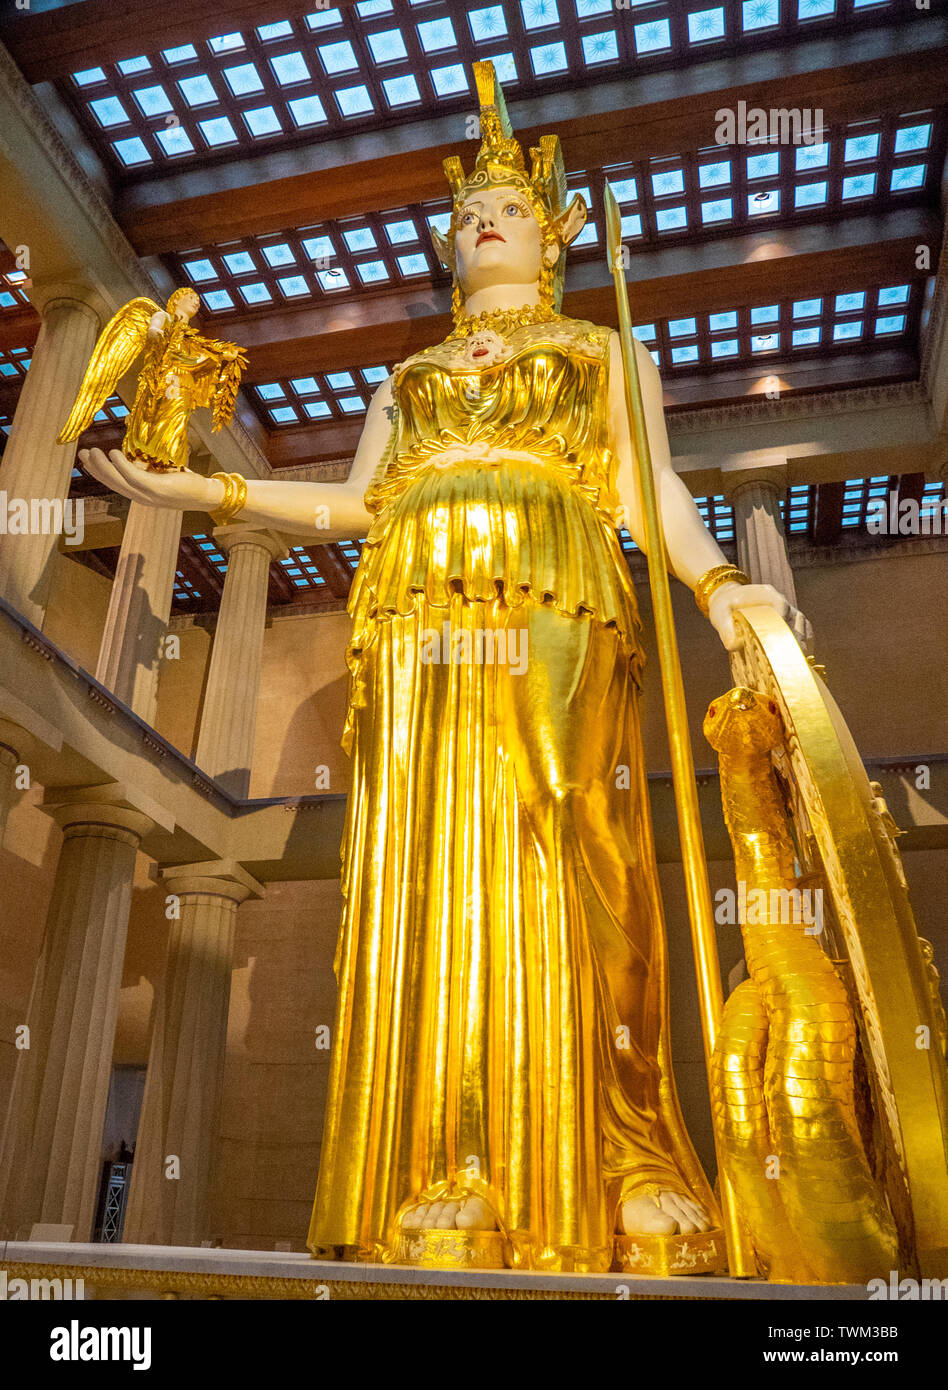 Full scale replica of Athena Parthenos statue holding statue of goddess Nike  inside Parthenon in Centennial Park Nashville Tennessee USA Stock Photo -  Alamy